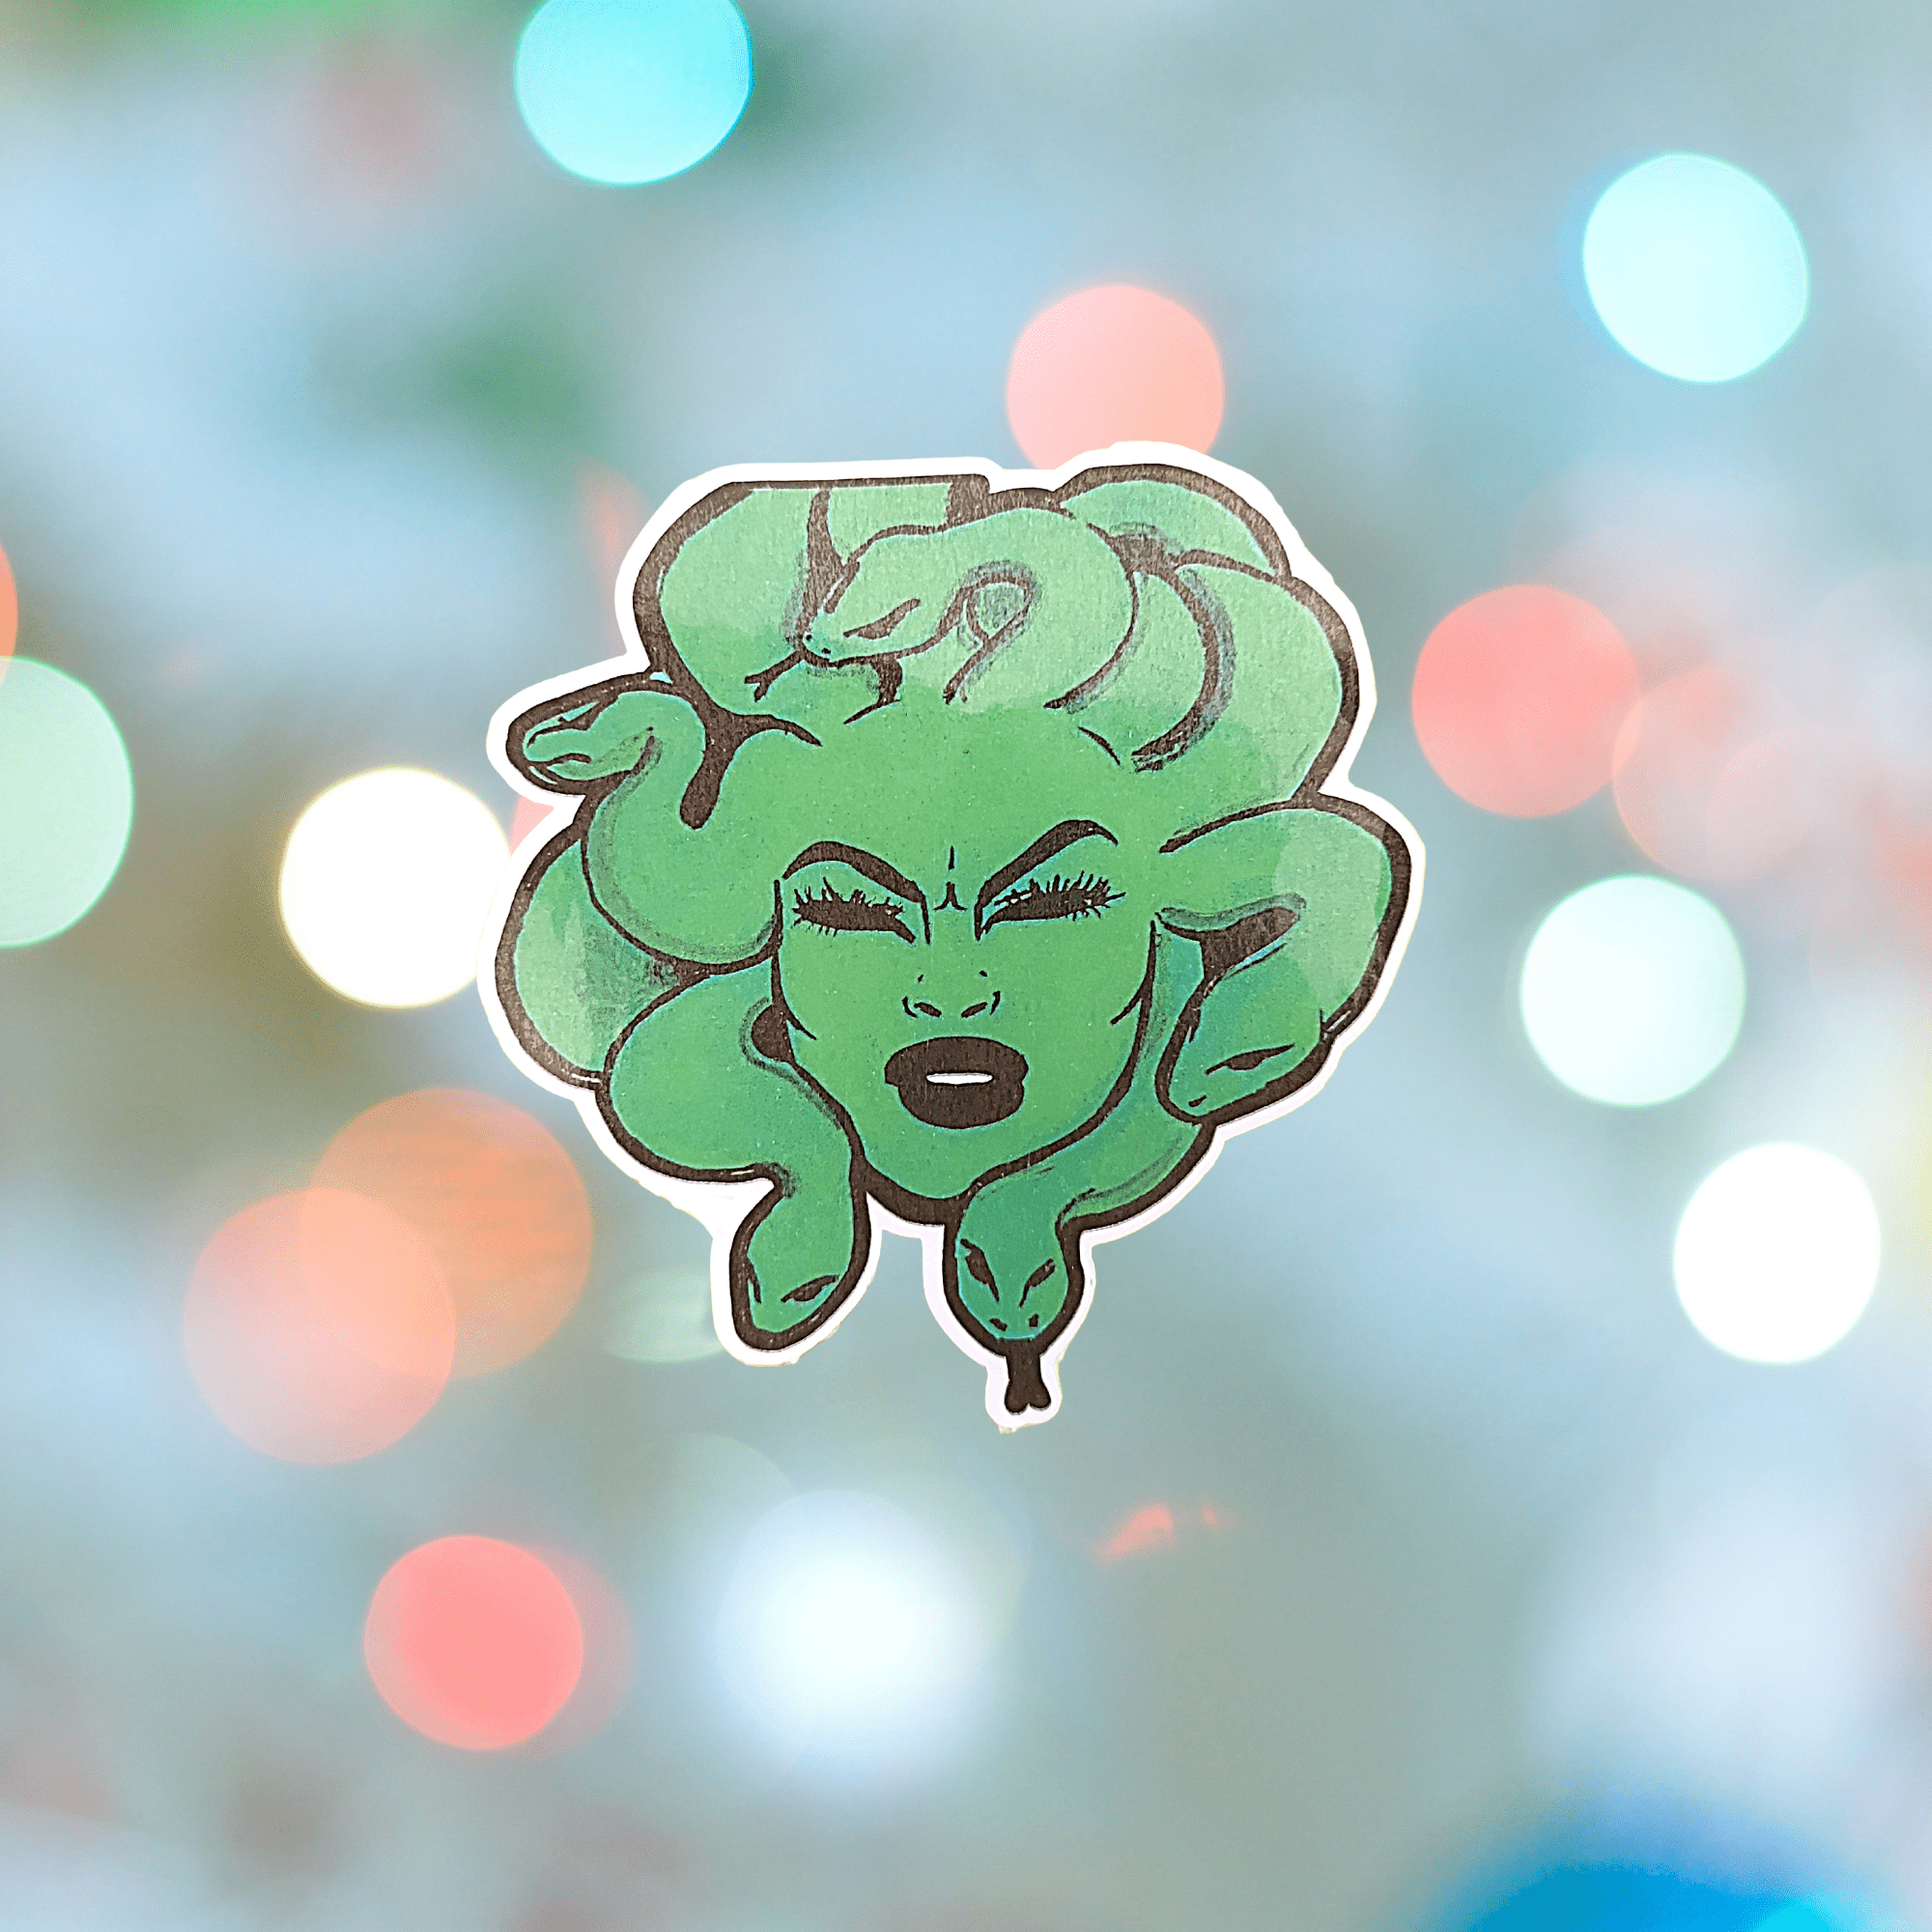 A sticker of Medusa with a blue and green gradient background - Medusa